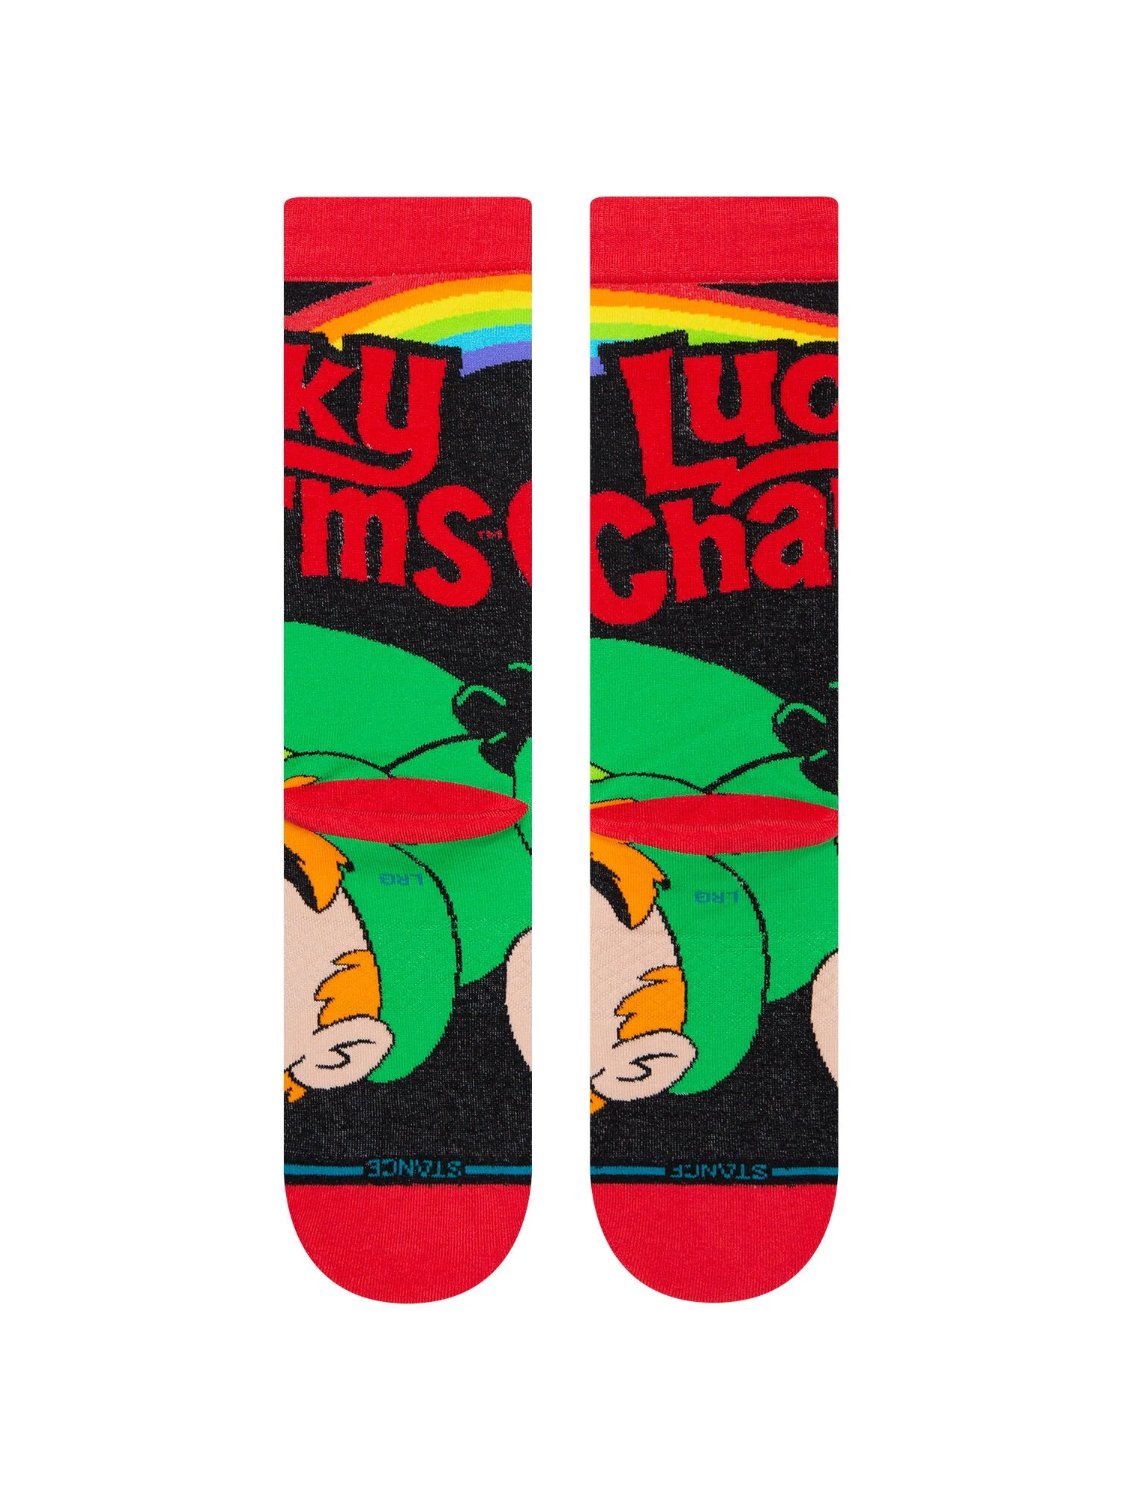 GENERAL MILLS LUCKY CHARMS CREW SOCKS